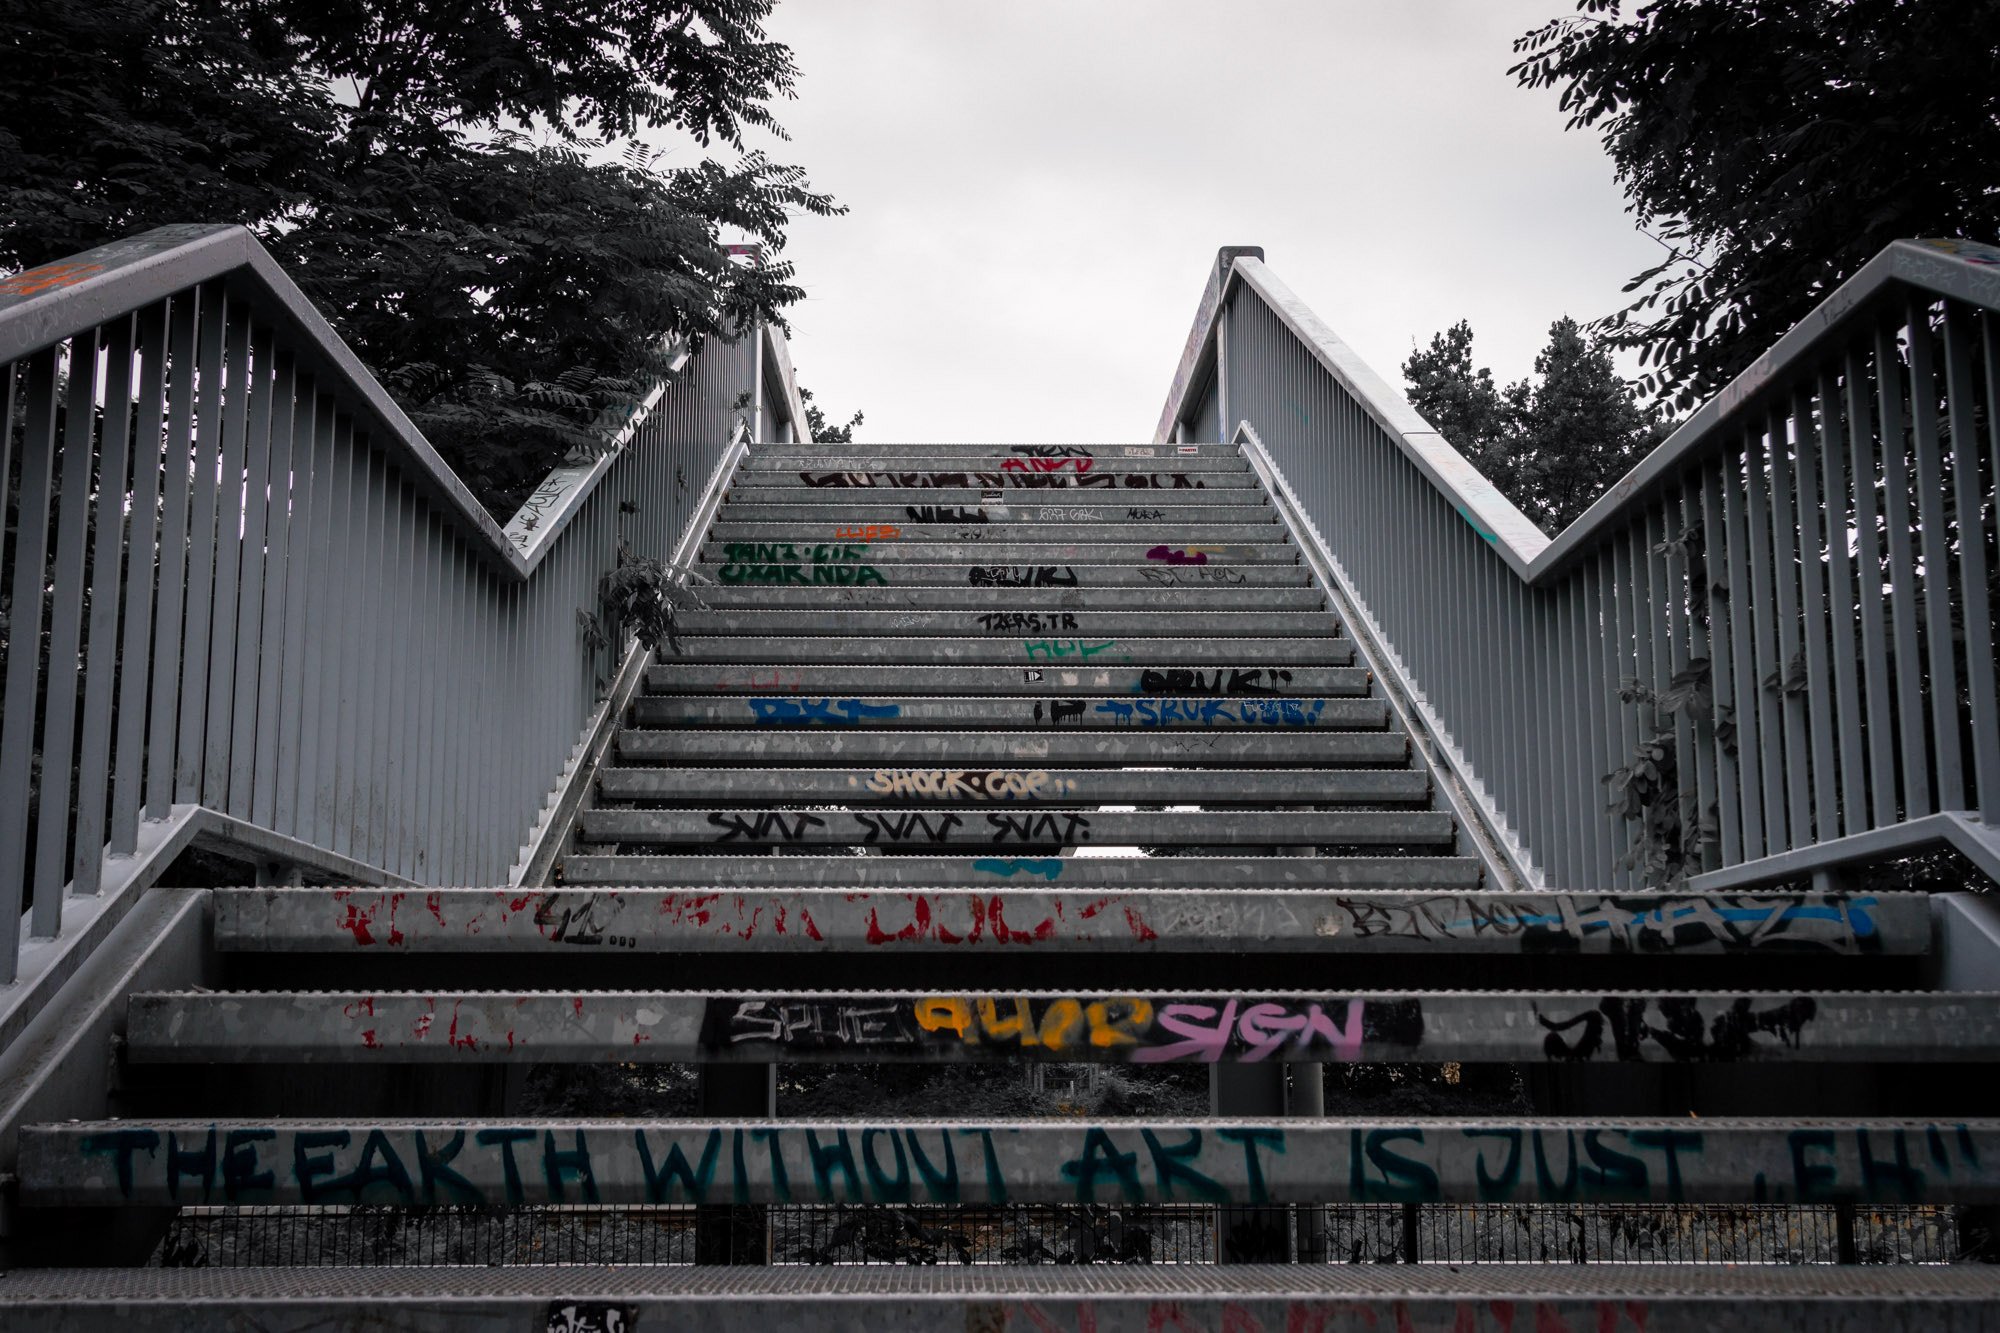 Canon EOS 7D + Sigma 24-105mm f/4 DG OS HSM | A sample photo. Treppe photography